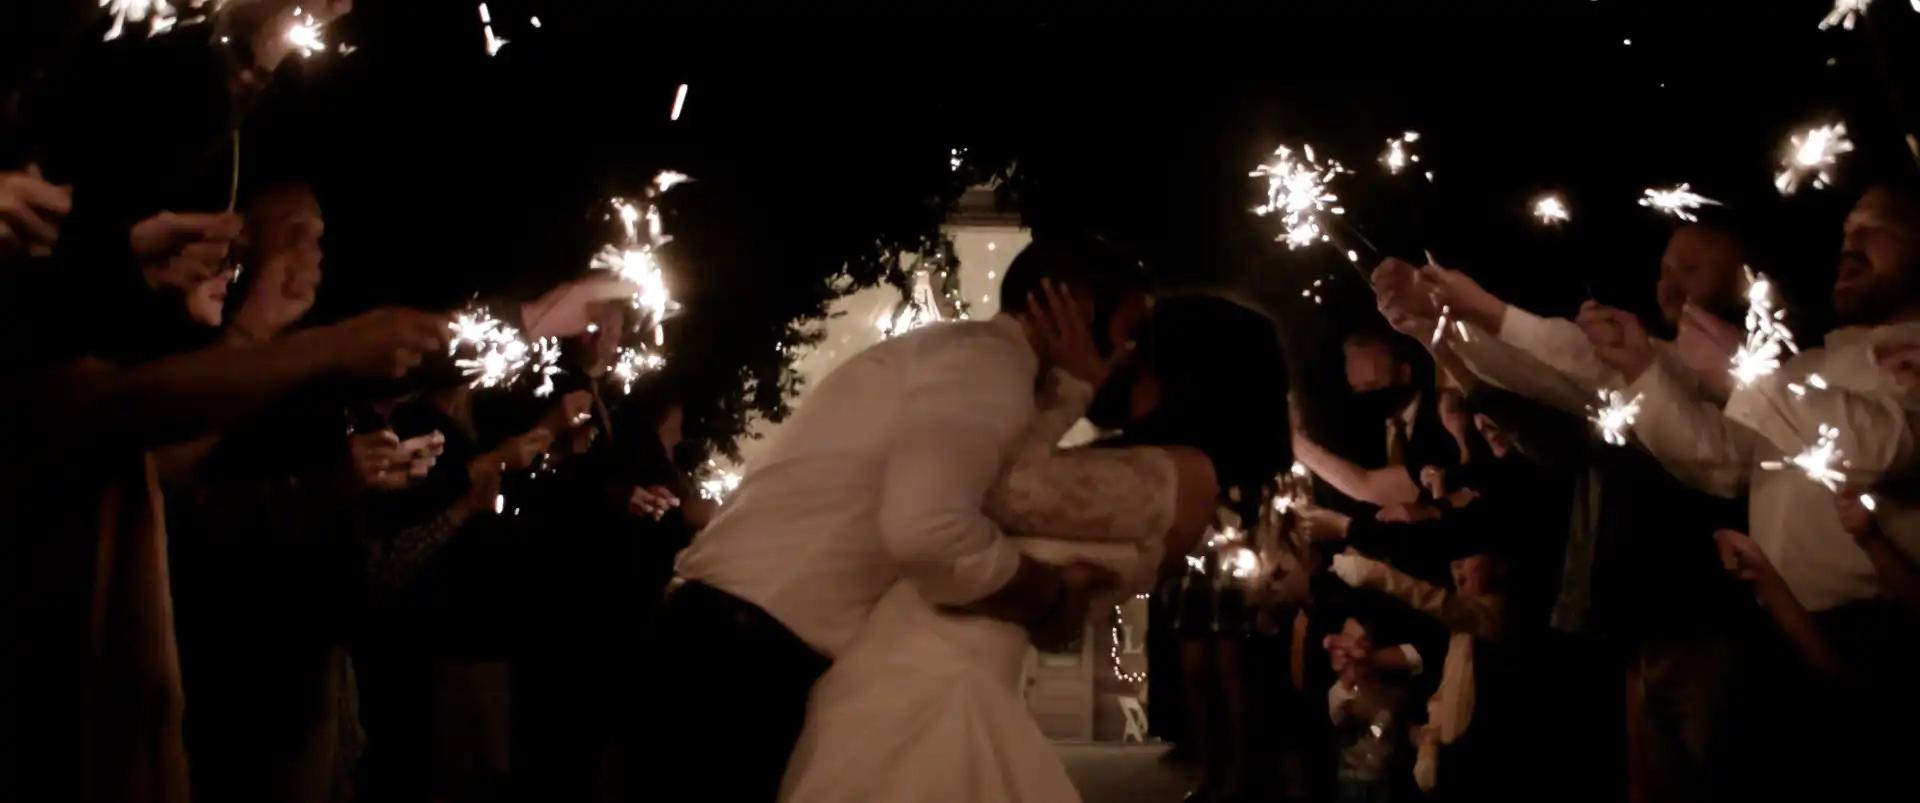 The groom dipping the bride for a kiss during the walkout surrounded by people holding sparklers.